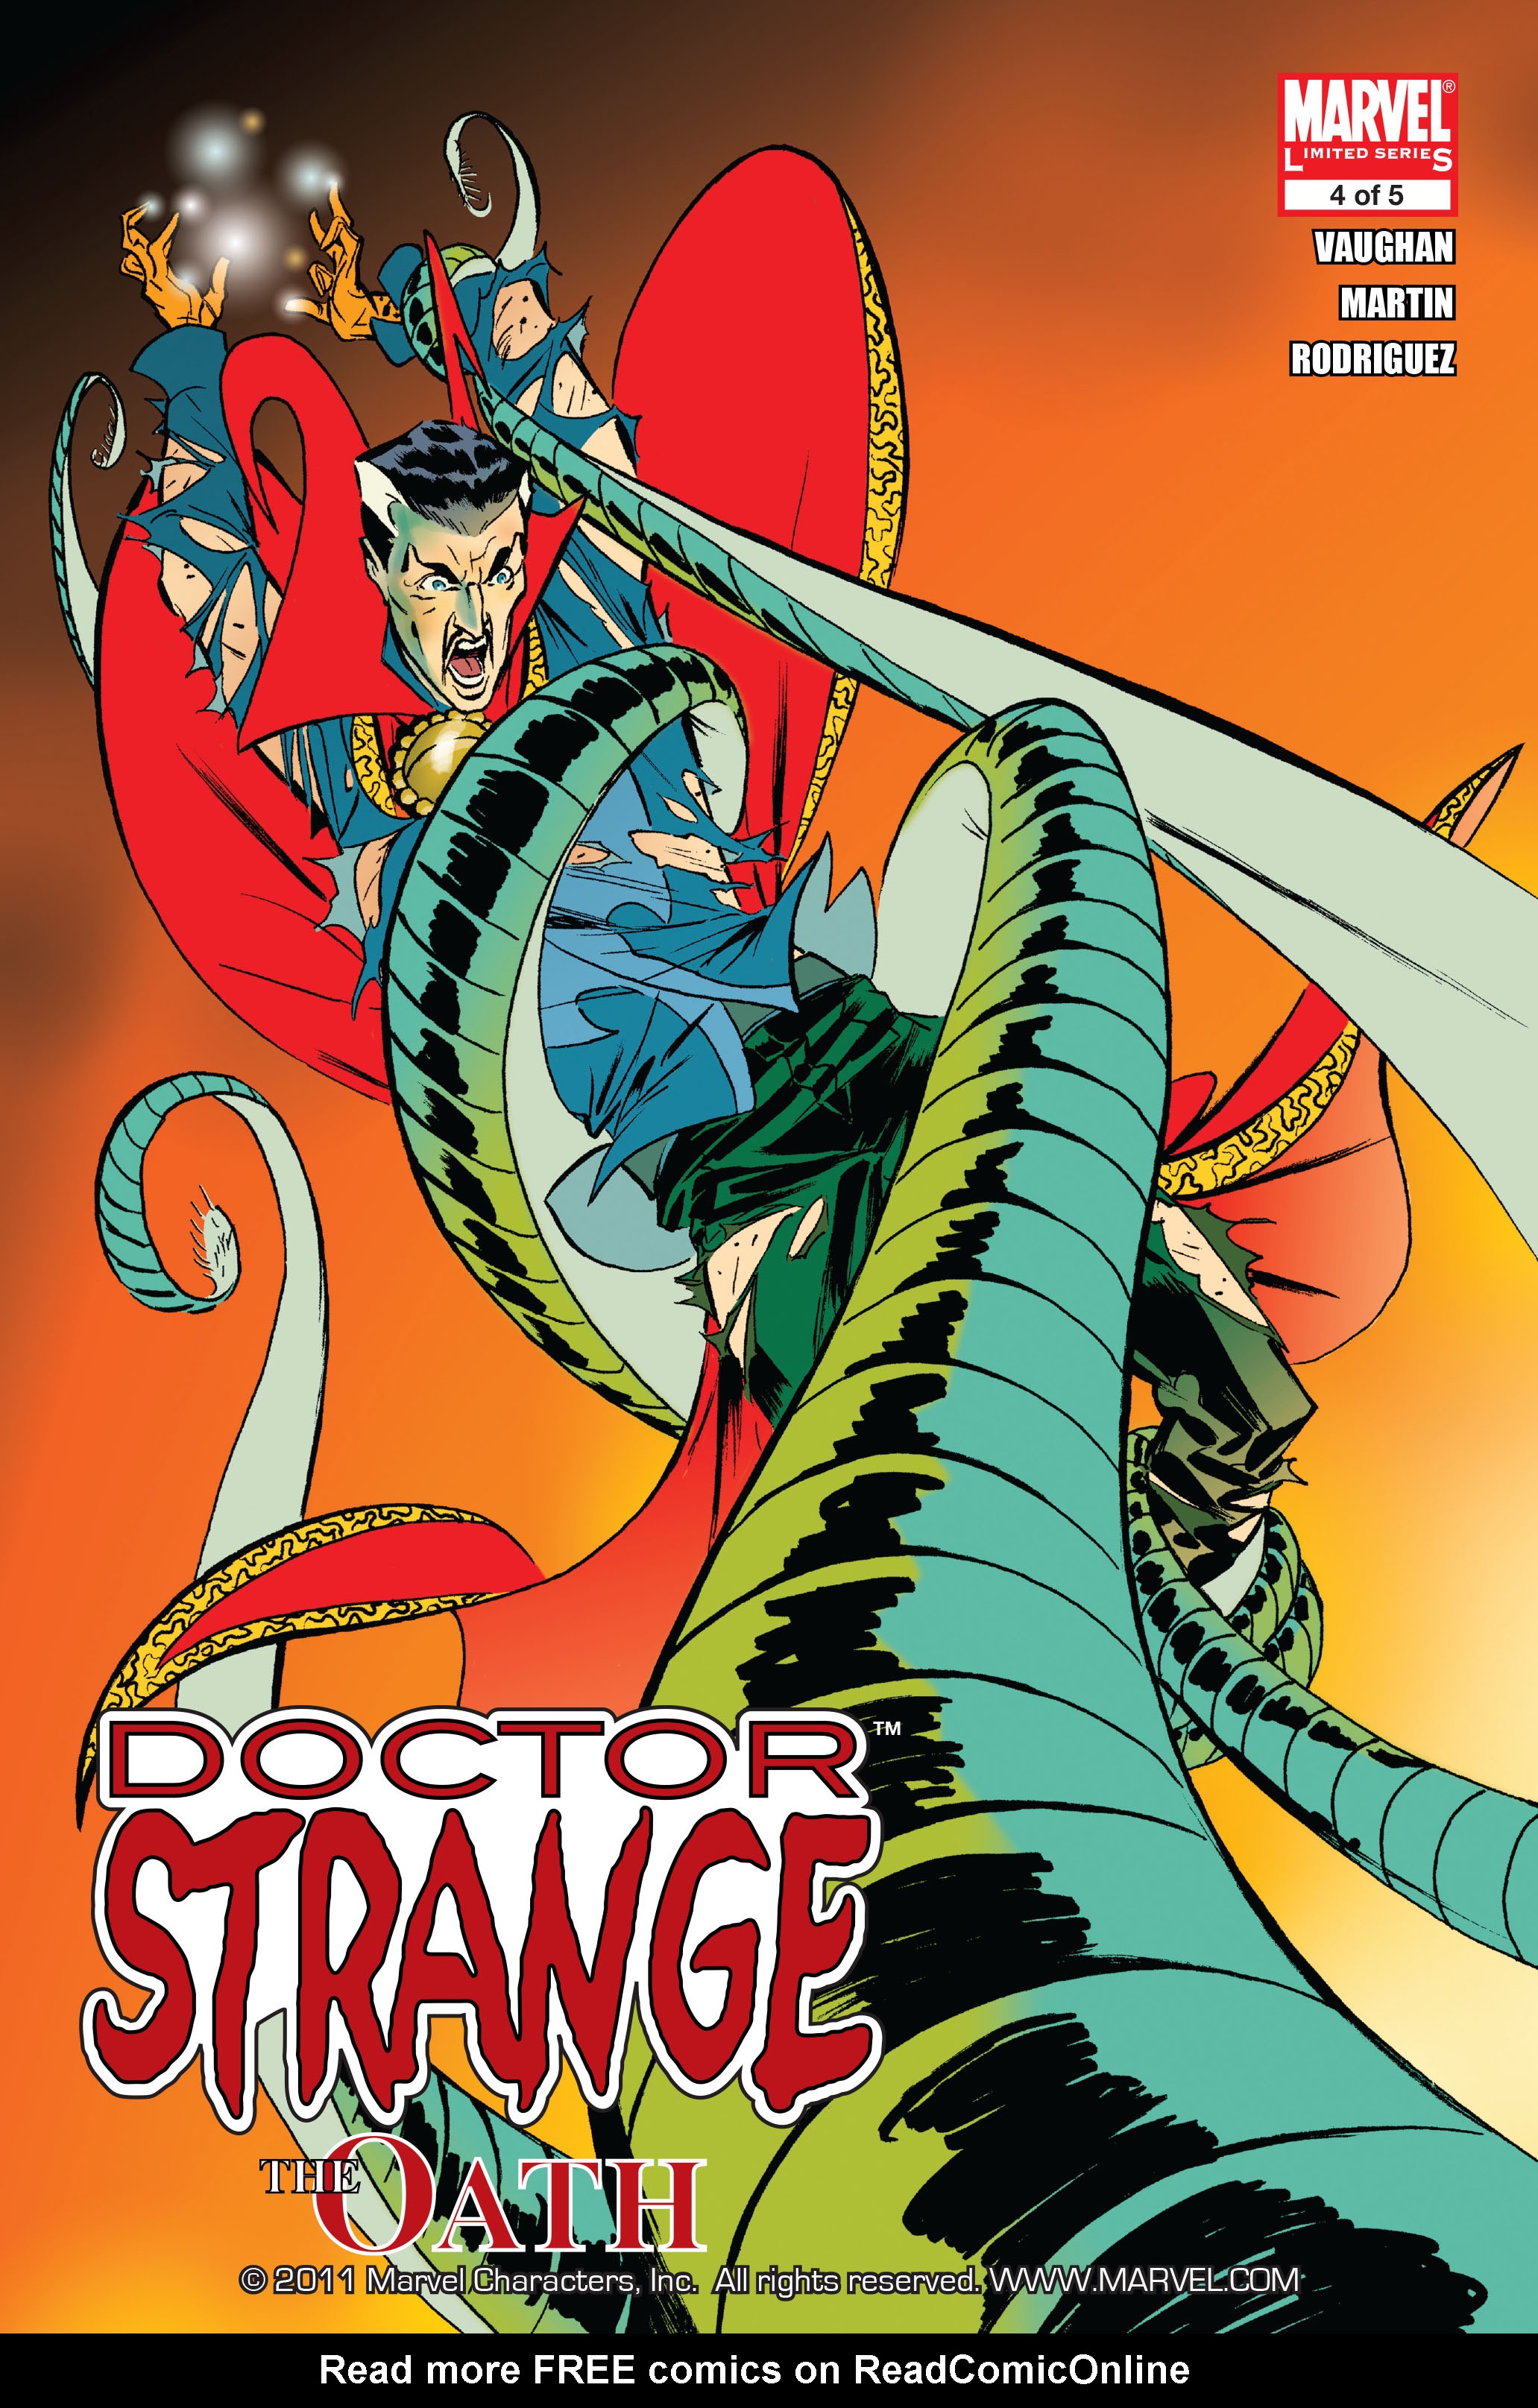 Doctor Strange The Oath Issue 4 | Read Doctor Strange The Oath Issue 4  comic online in high quality. Read Full Comic online for free - Read comics  online in high quality .